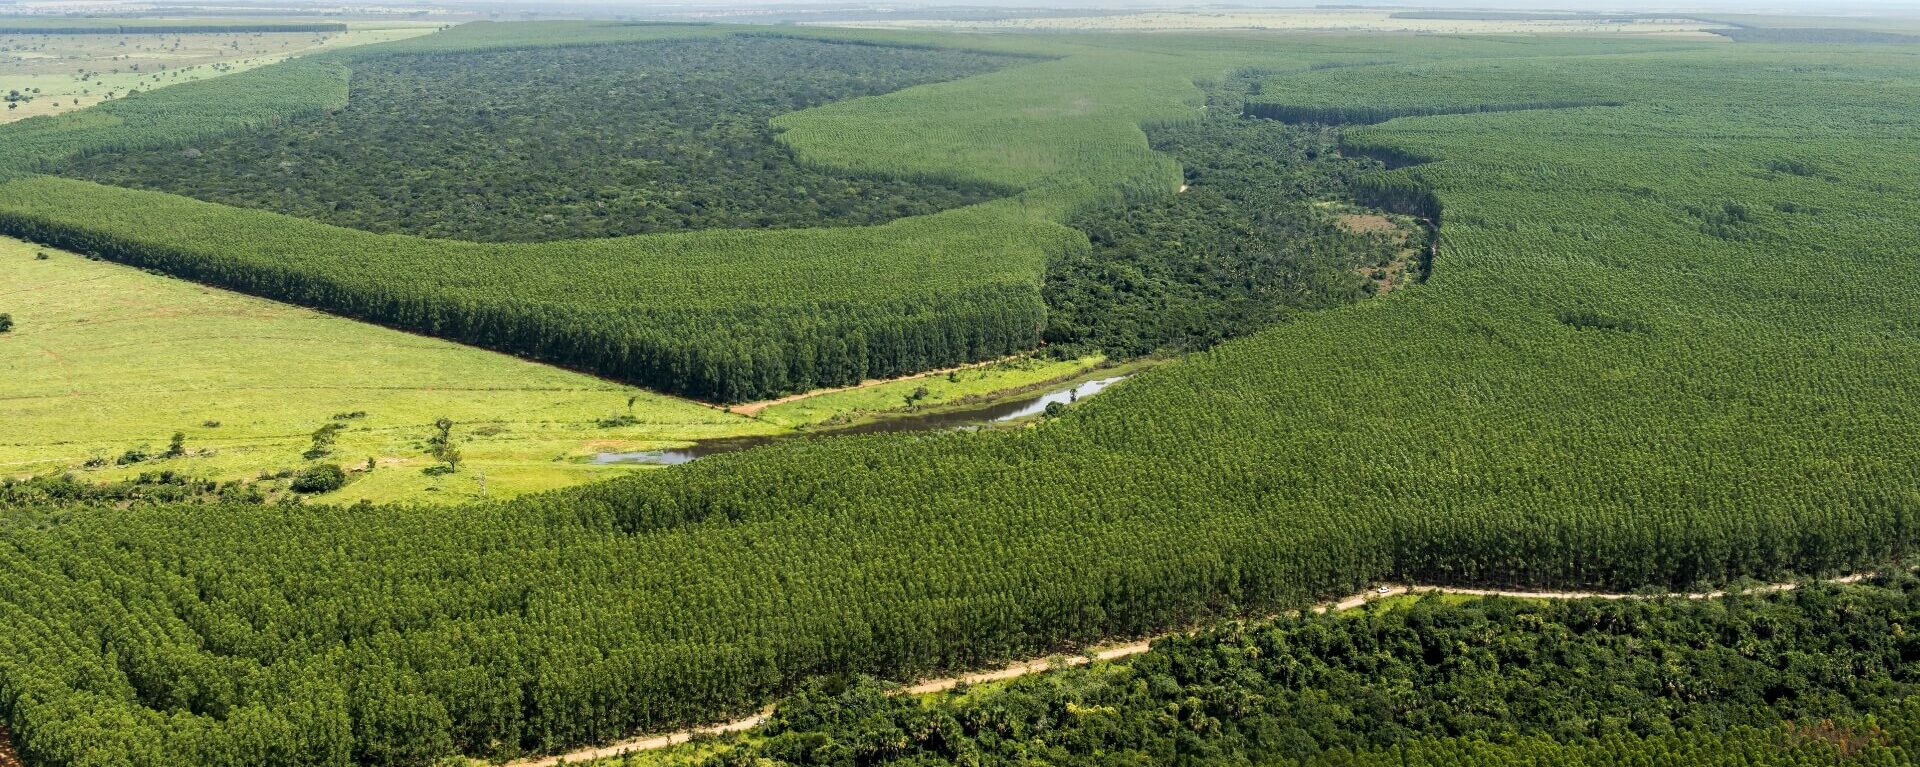 All of the eucalyptus used by Eldorado Brazil comes from reforestation areas, maintained within certified areas, helping to protect biodiversity and support local development. Our forests remove more carbon from the air than the company emits in its operations, thus neutralizing our carbon balance. We also generate clean energy from unusable eucalyptus residue.